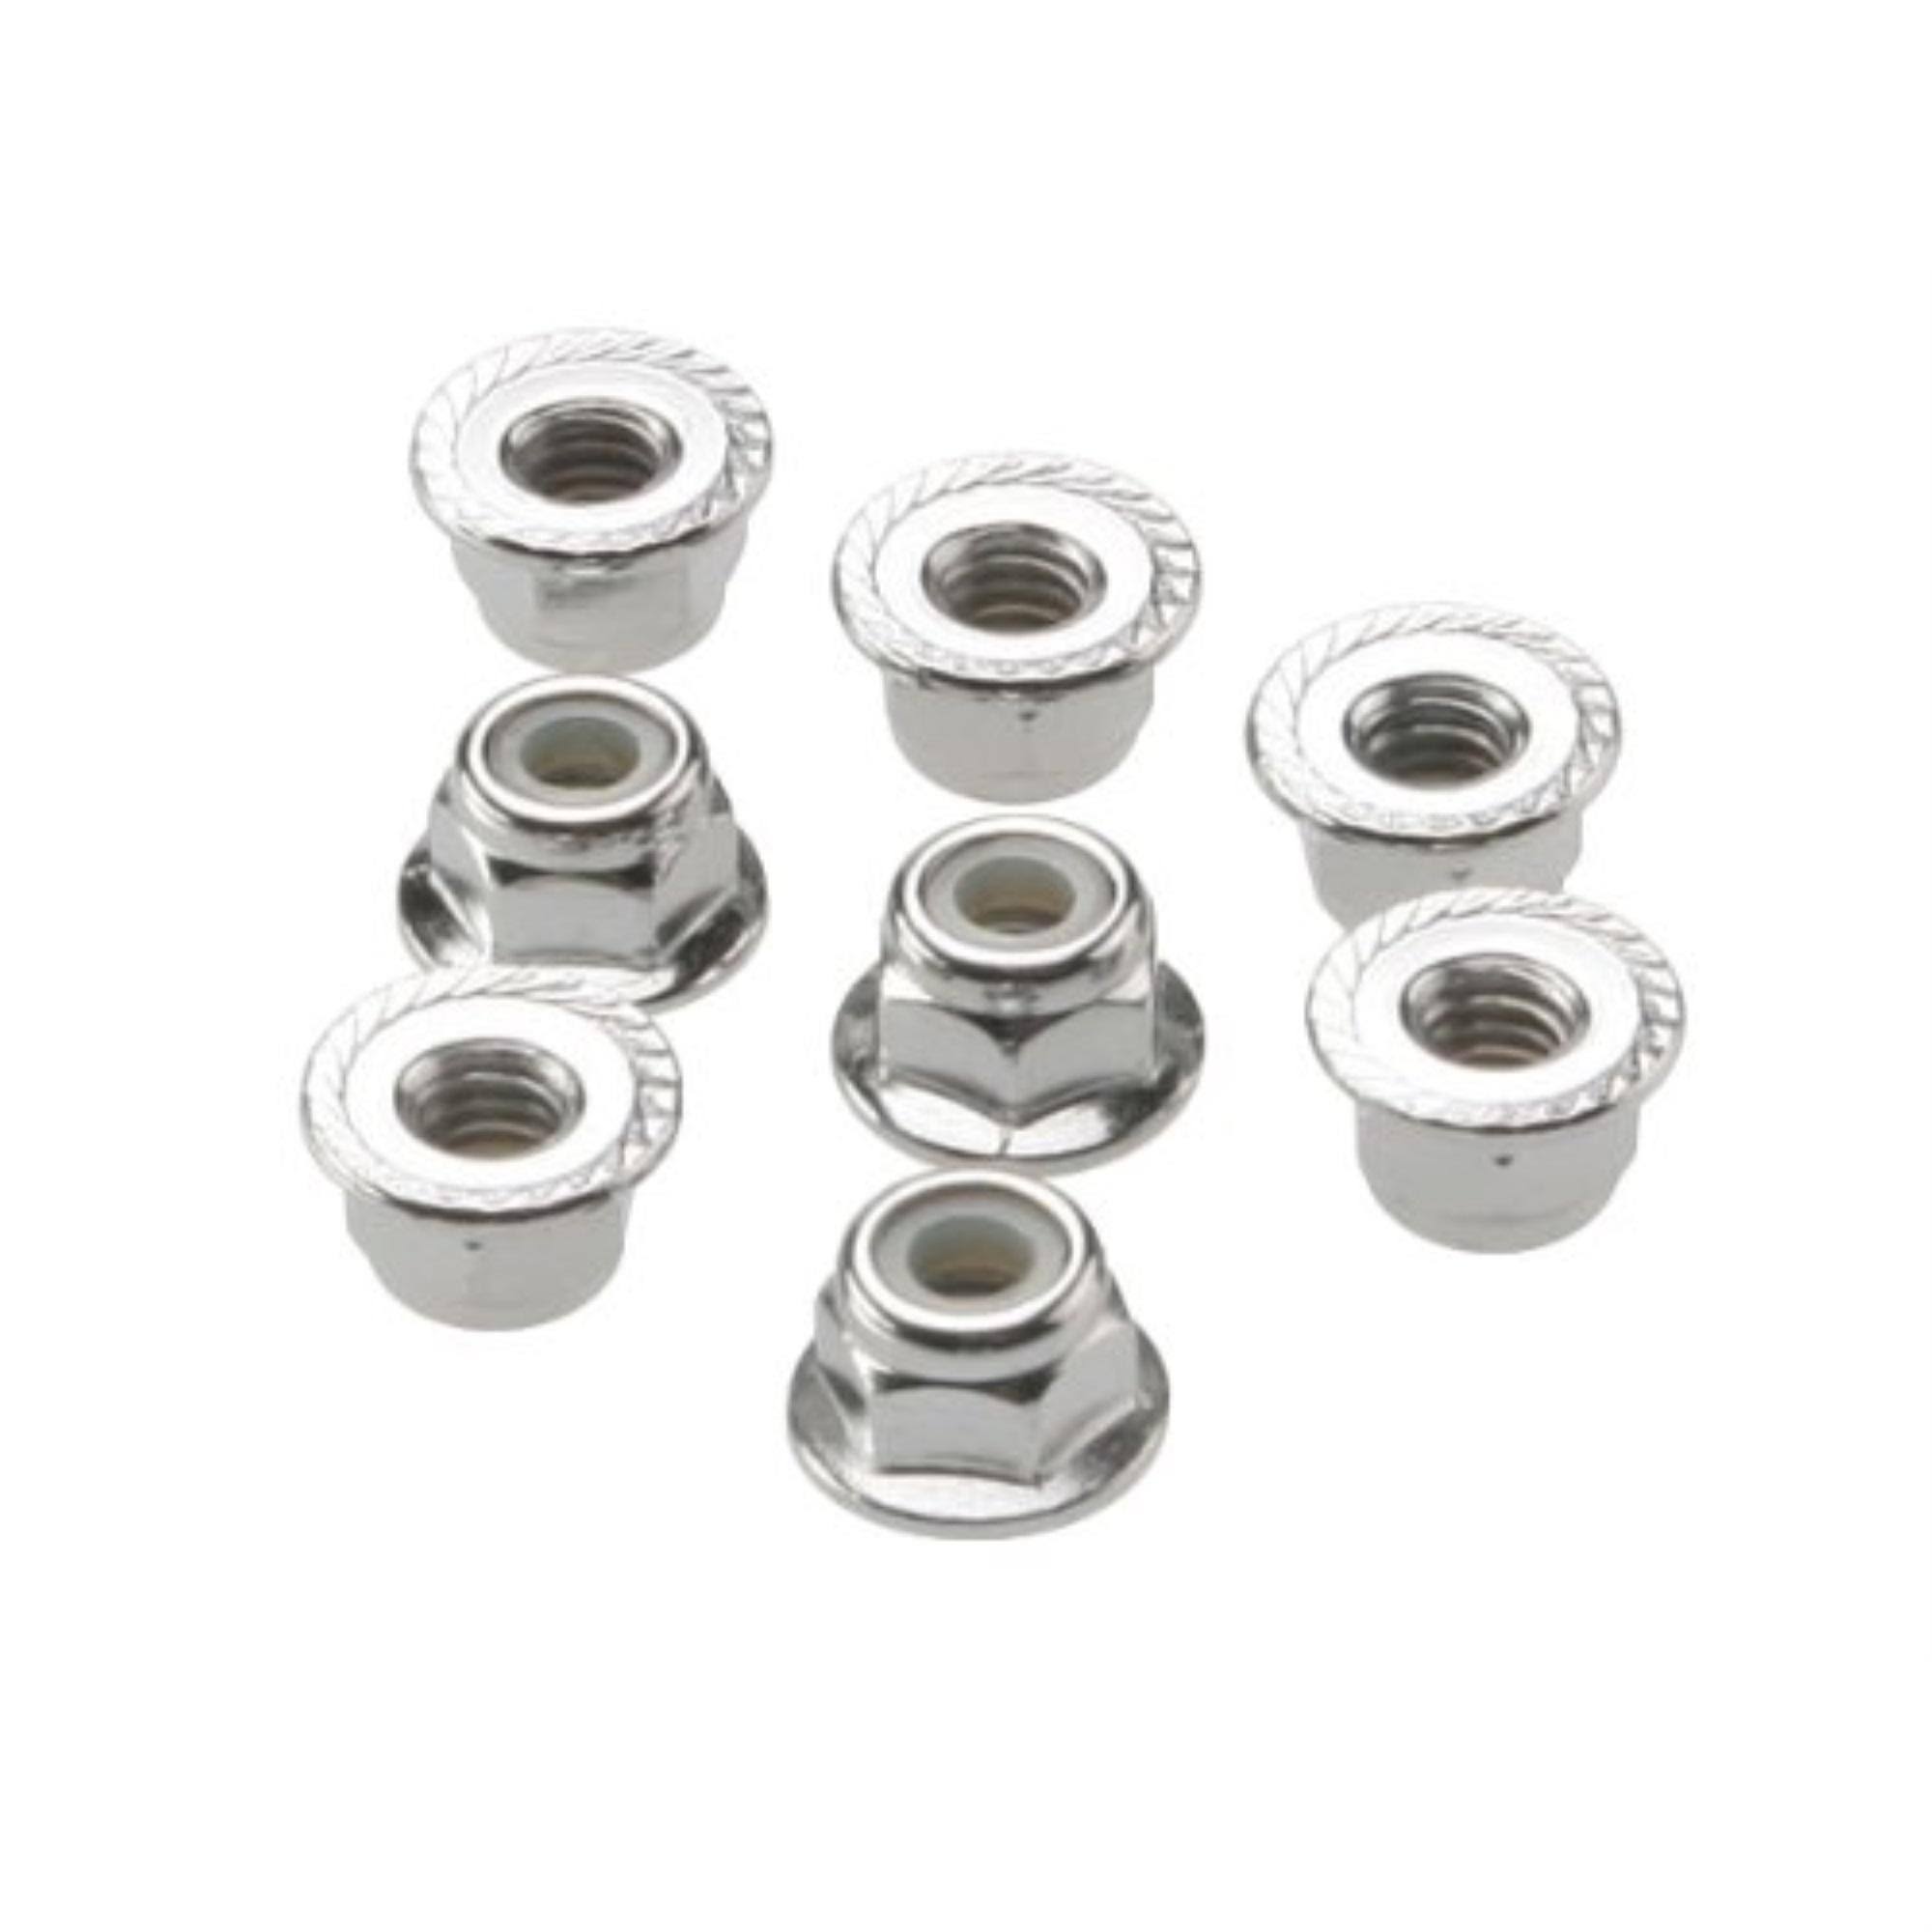 Traxxas Flanged Nylon Lock Nuts - Chrome, 4mm, 8 Pack